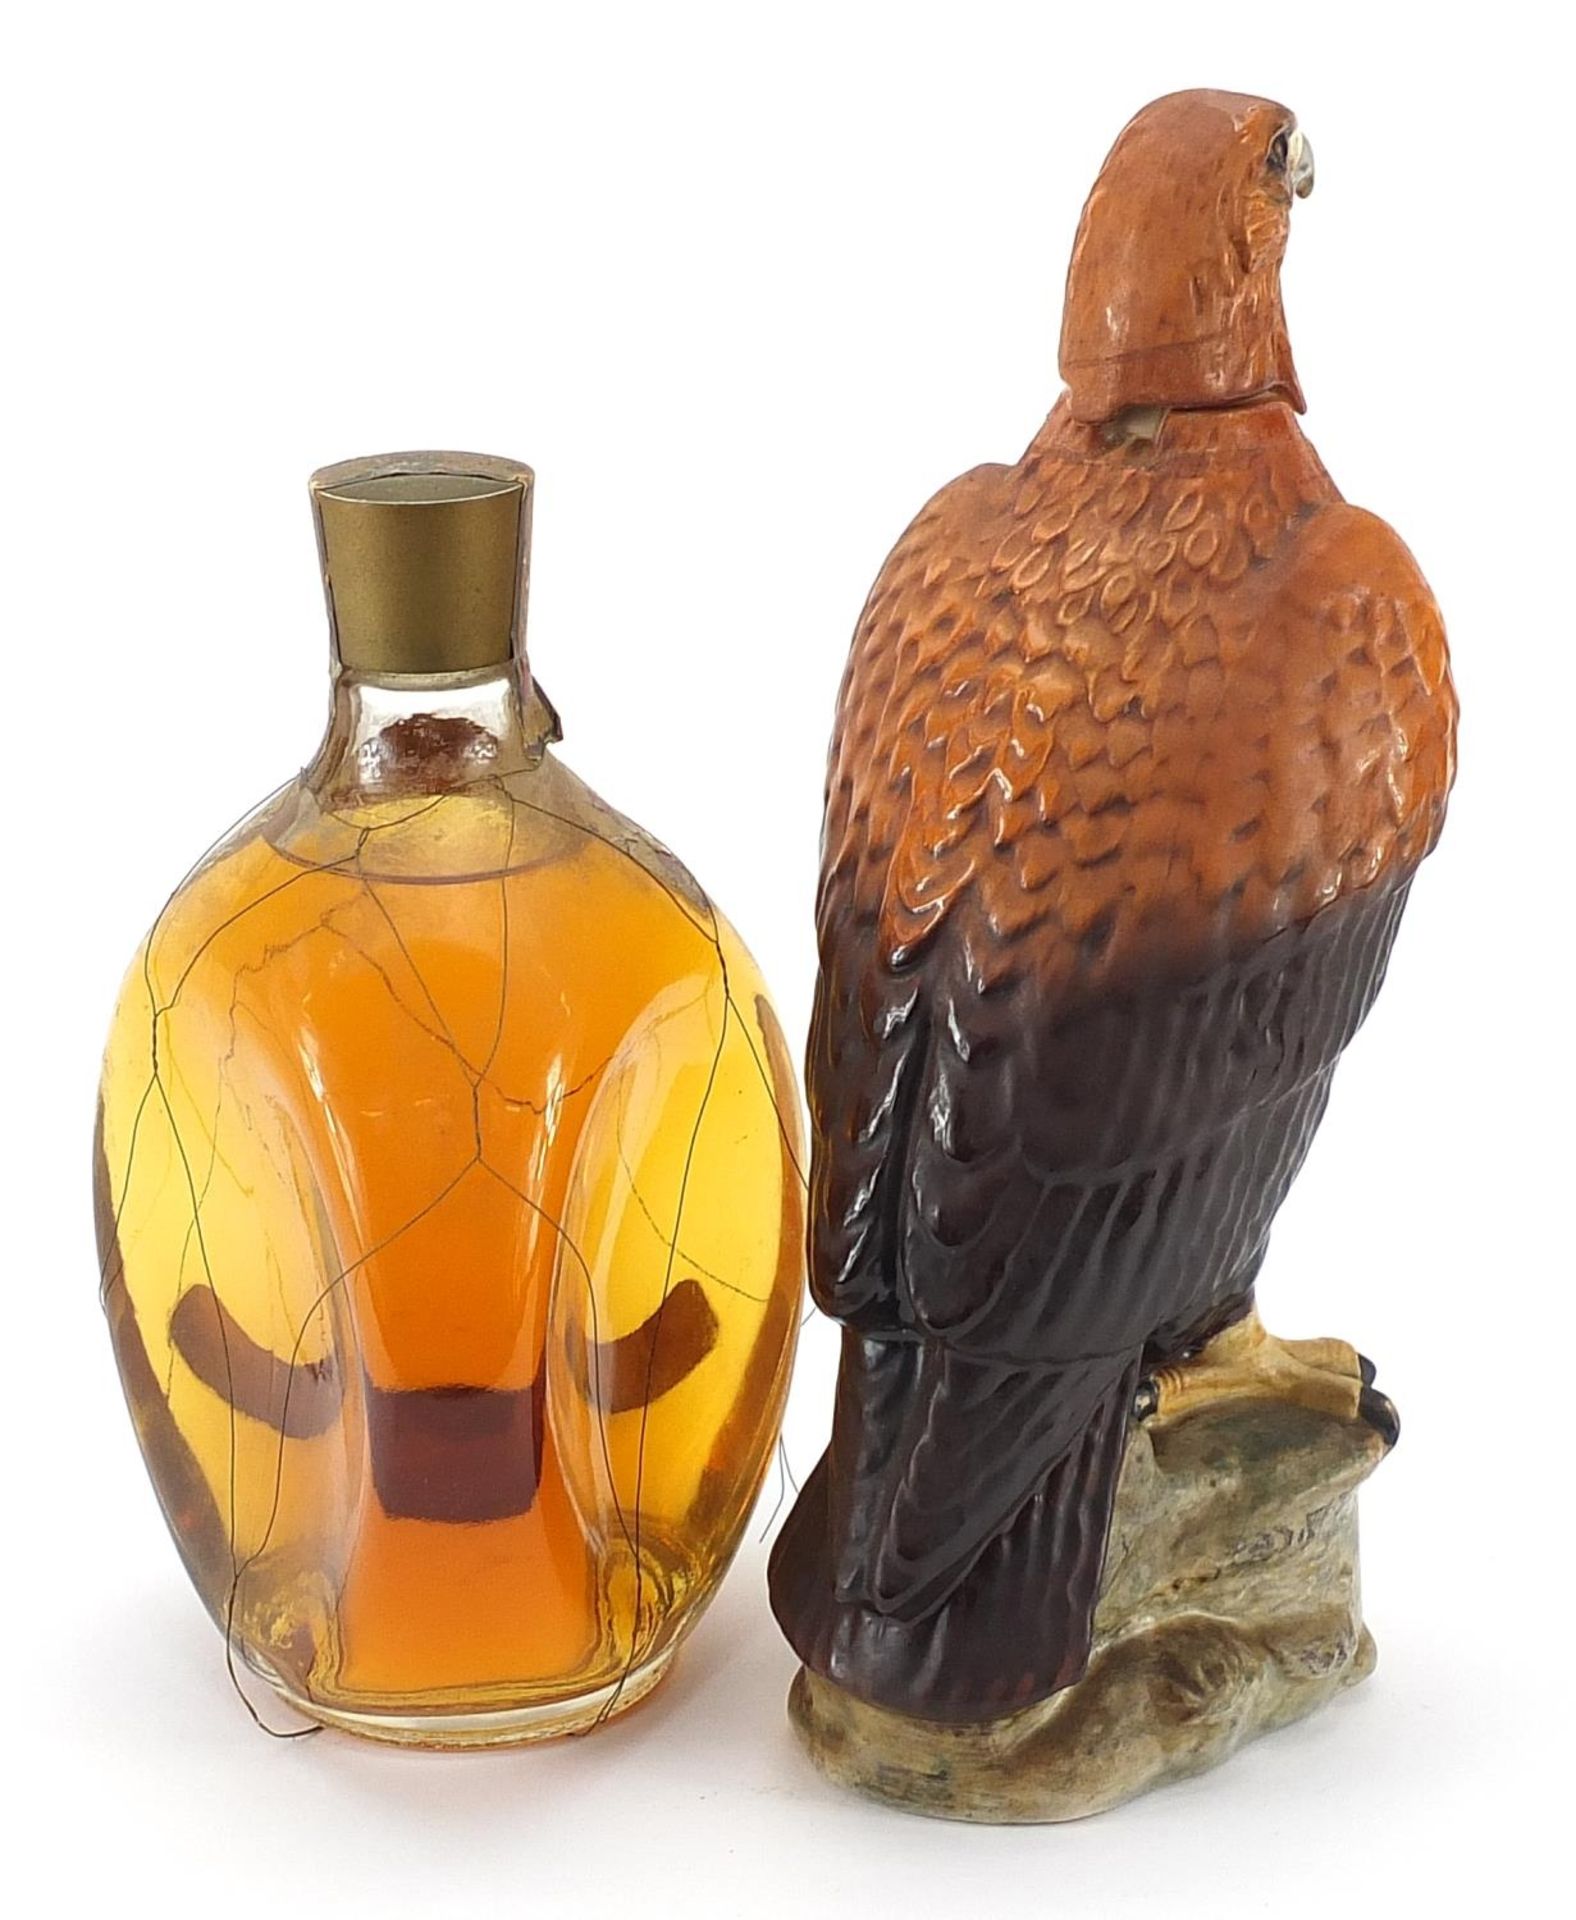 Bottle of Haig Dimple Scotch whiskey and a Beswick Golden Eagle decanter - Image 2 of 3